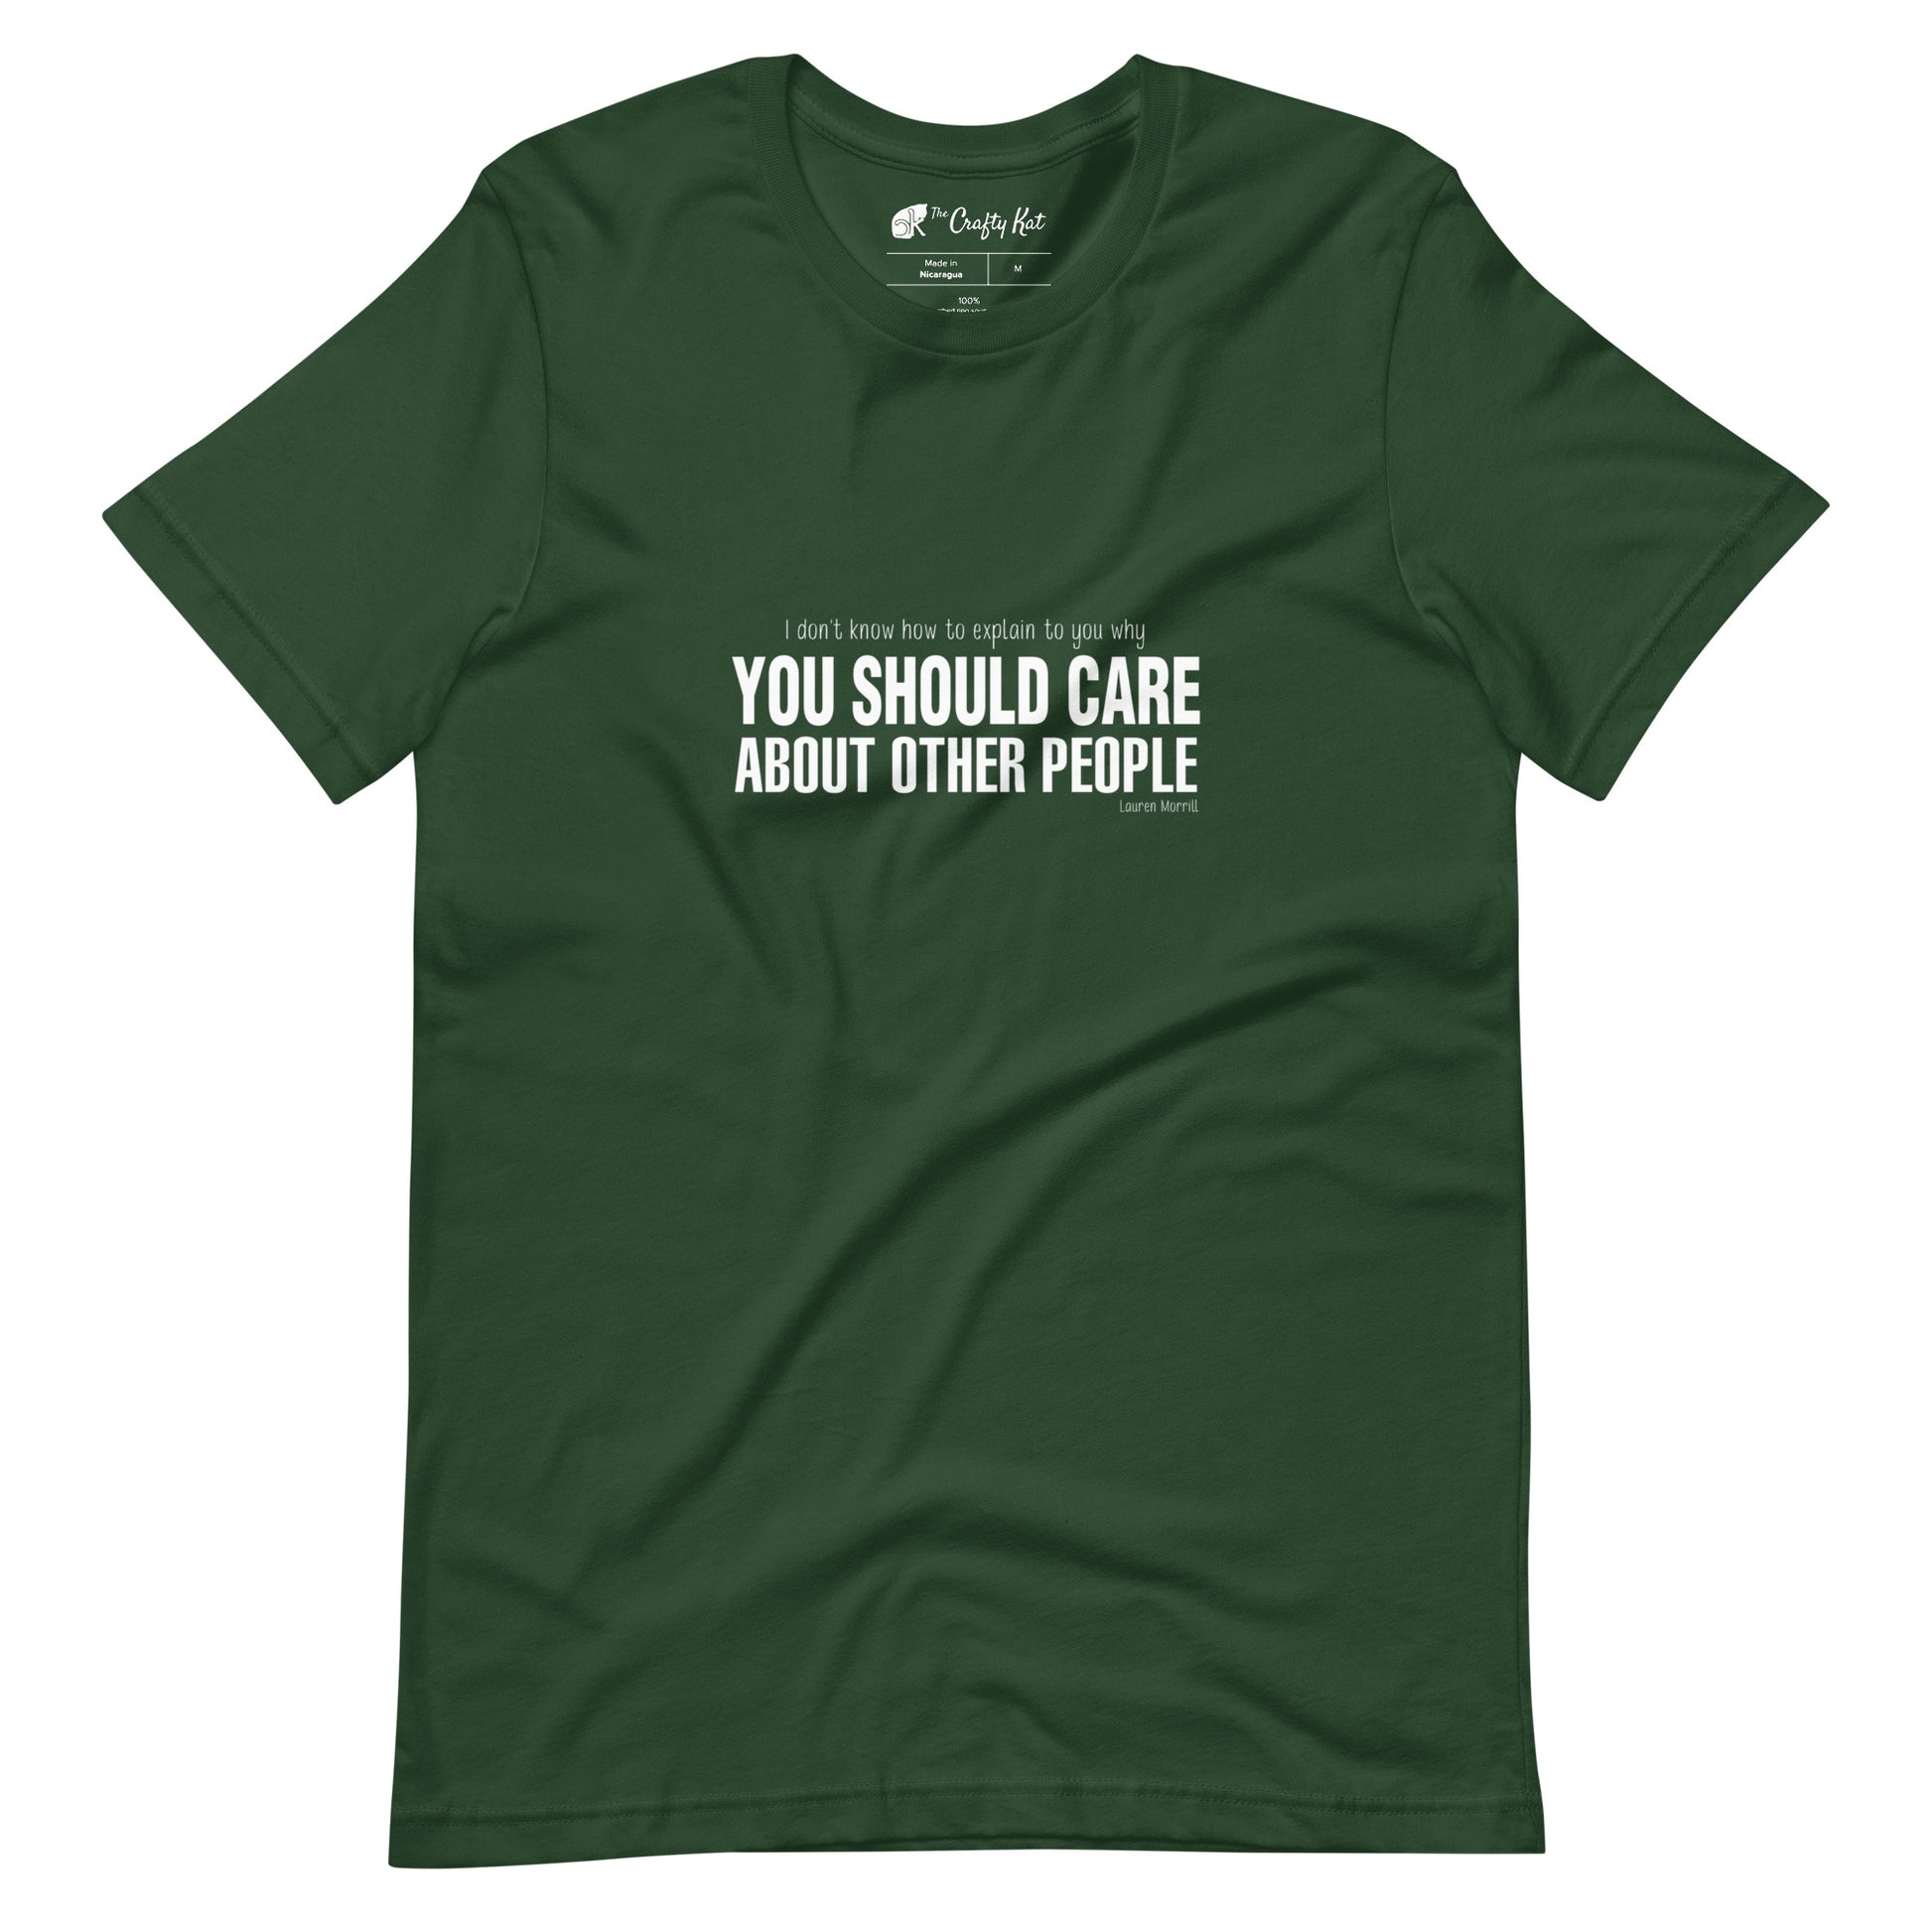 Forest t-shirt with quote by Lauren Morrill: "I don't know how to explain to you why YOU SHOULD CARE ABOUT OTHER PEOPLE"